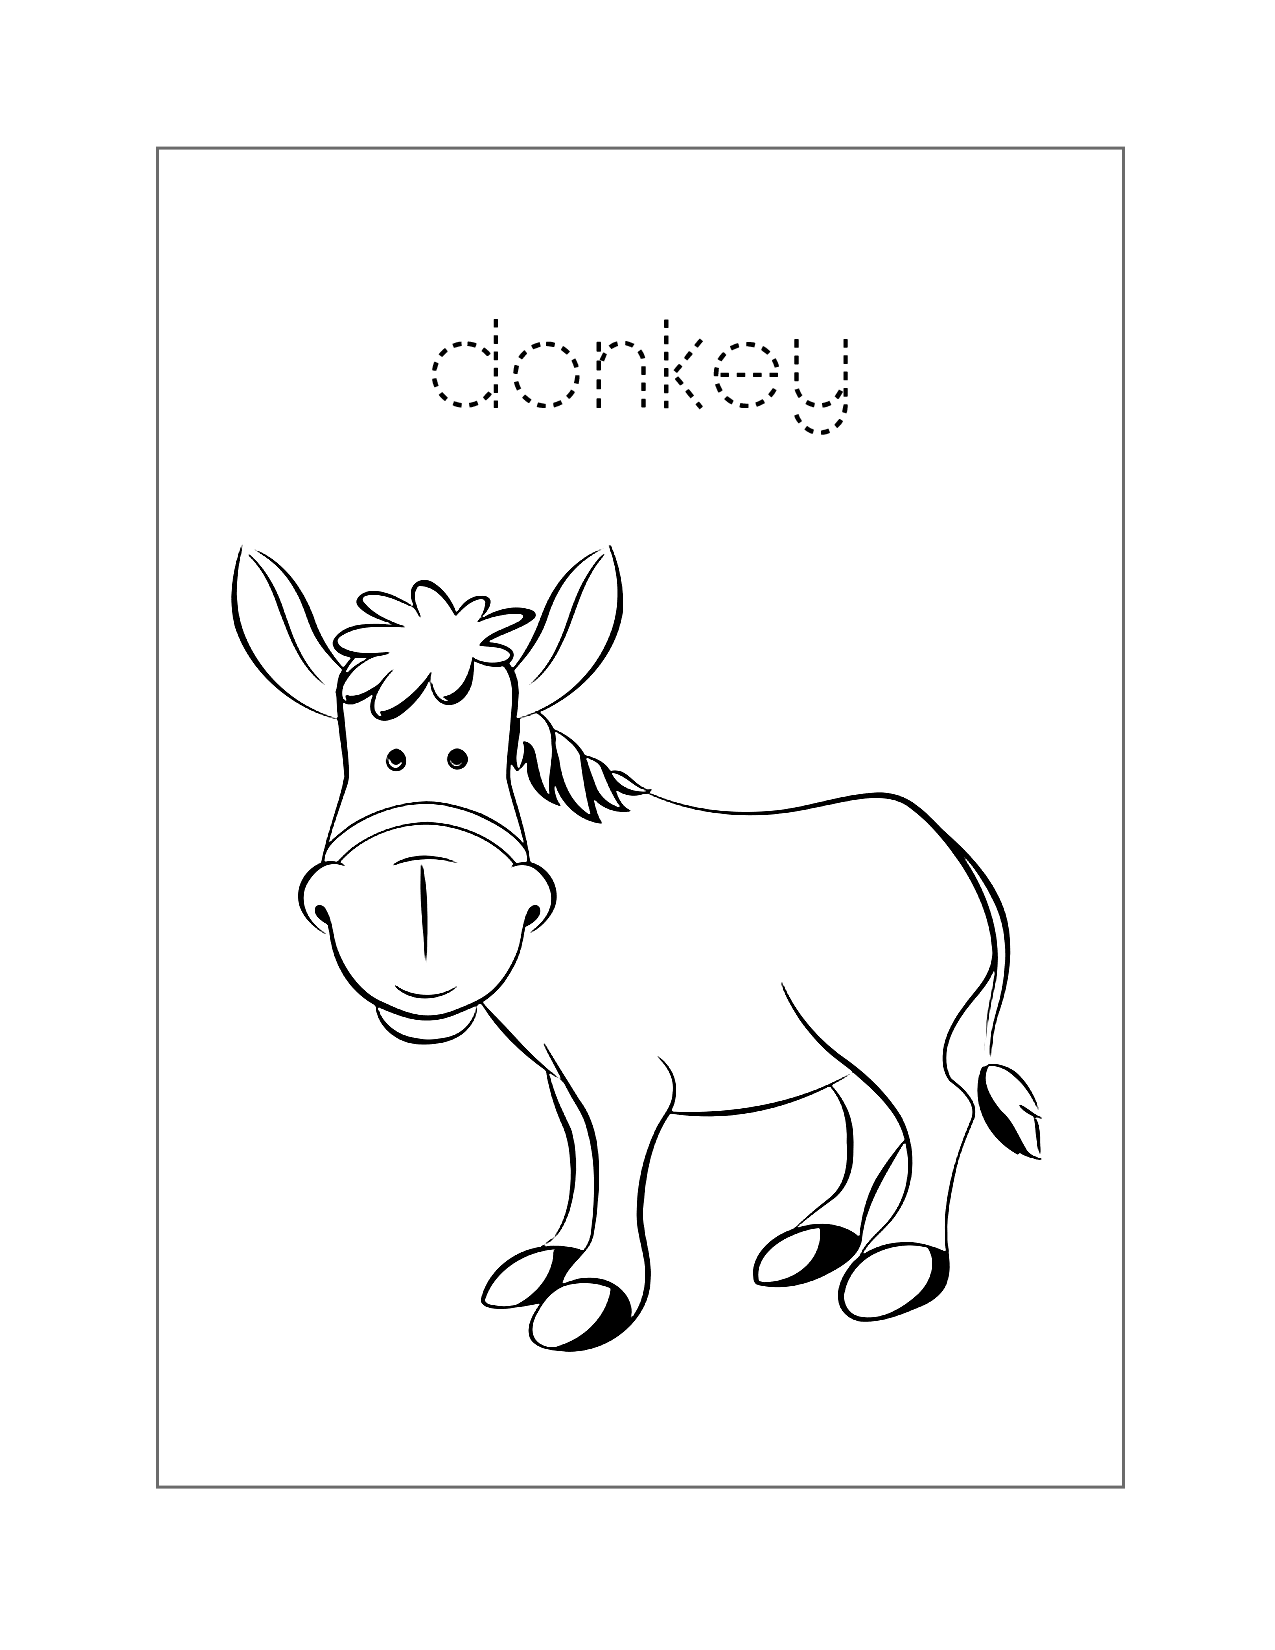 Donkey Spelling Coloring Sheet